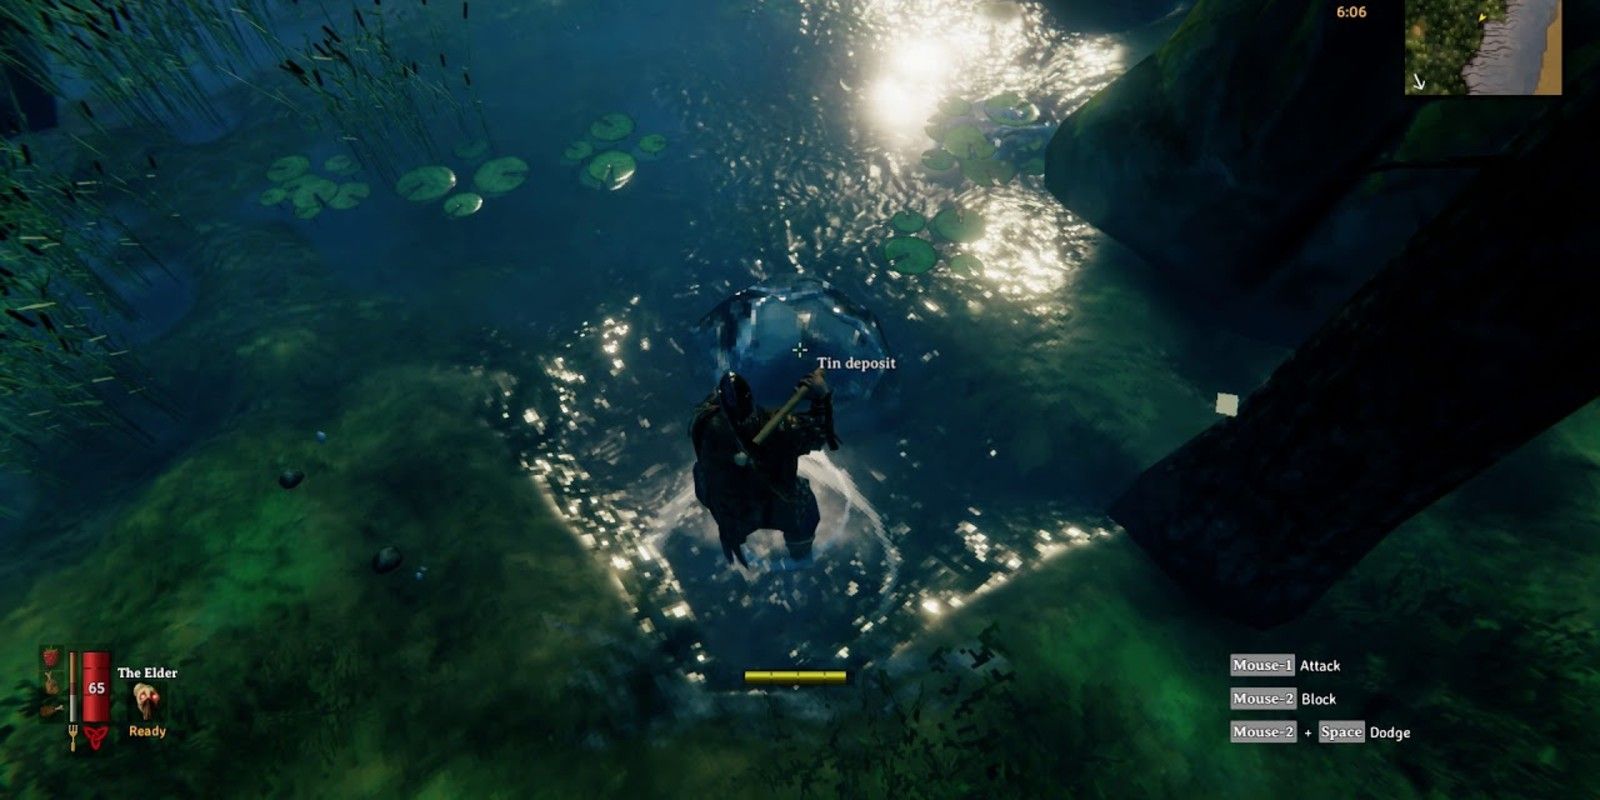 Players find a Tin Deposit near a water source in the Black Forest biome in Valheim